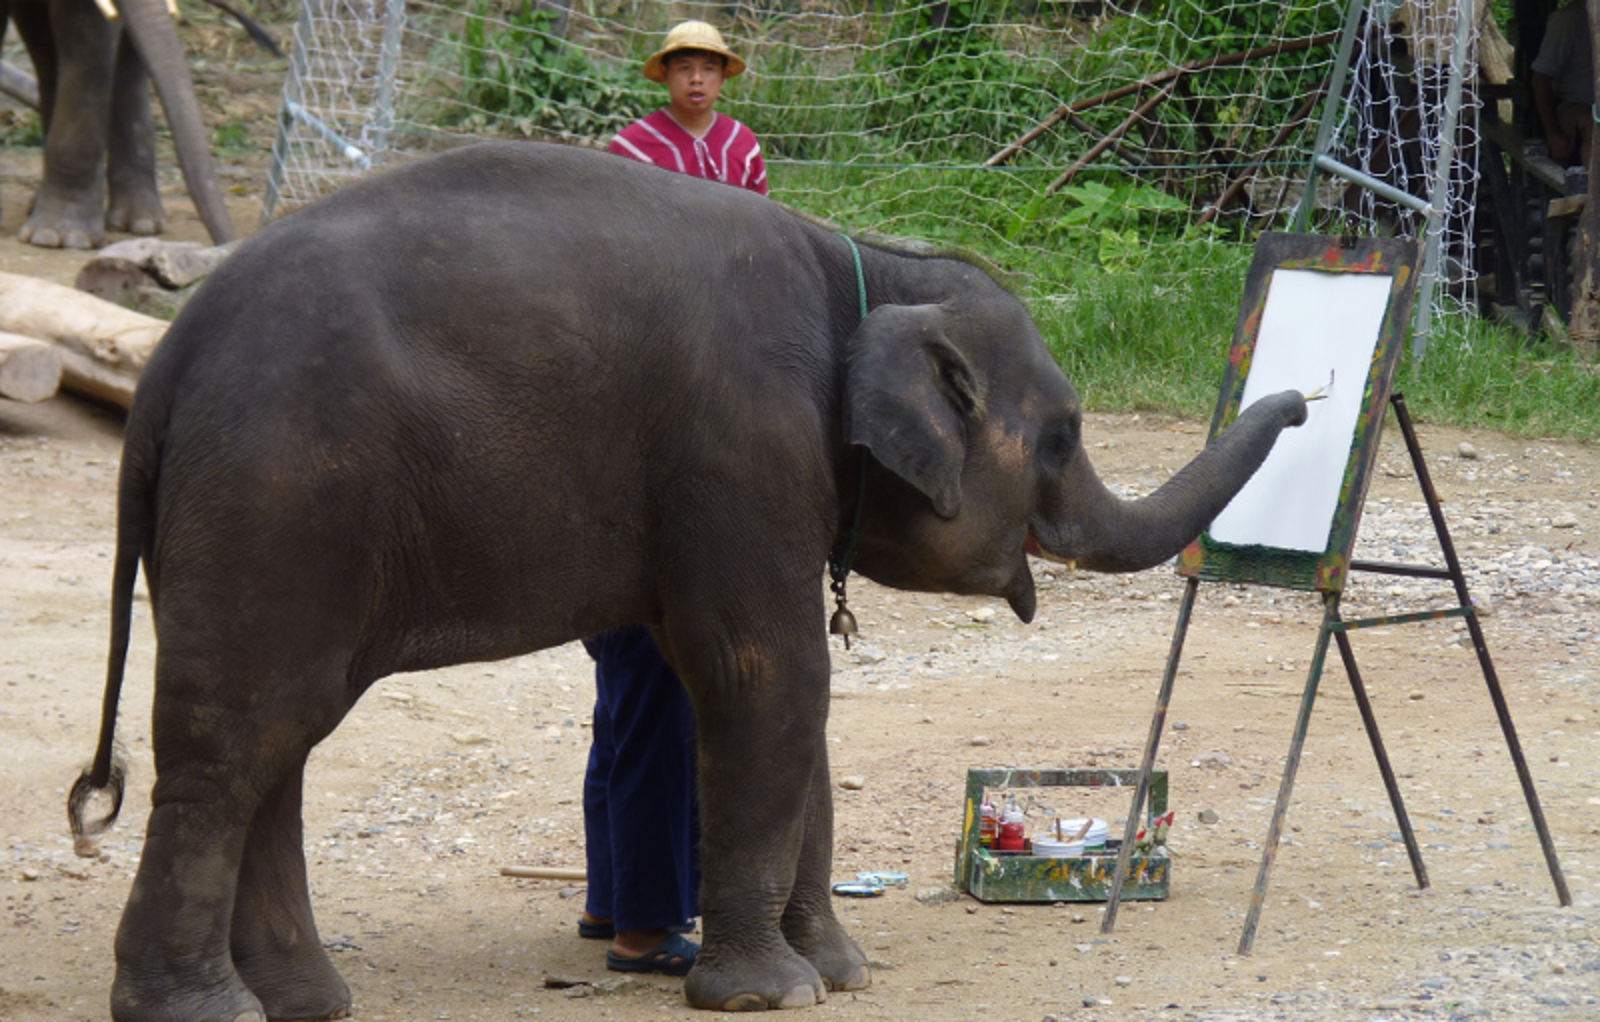 Elephant Artists? Here's Why Making an Elephant Paint is Cruel ...